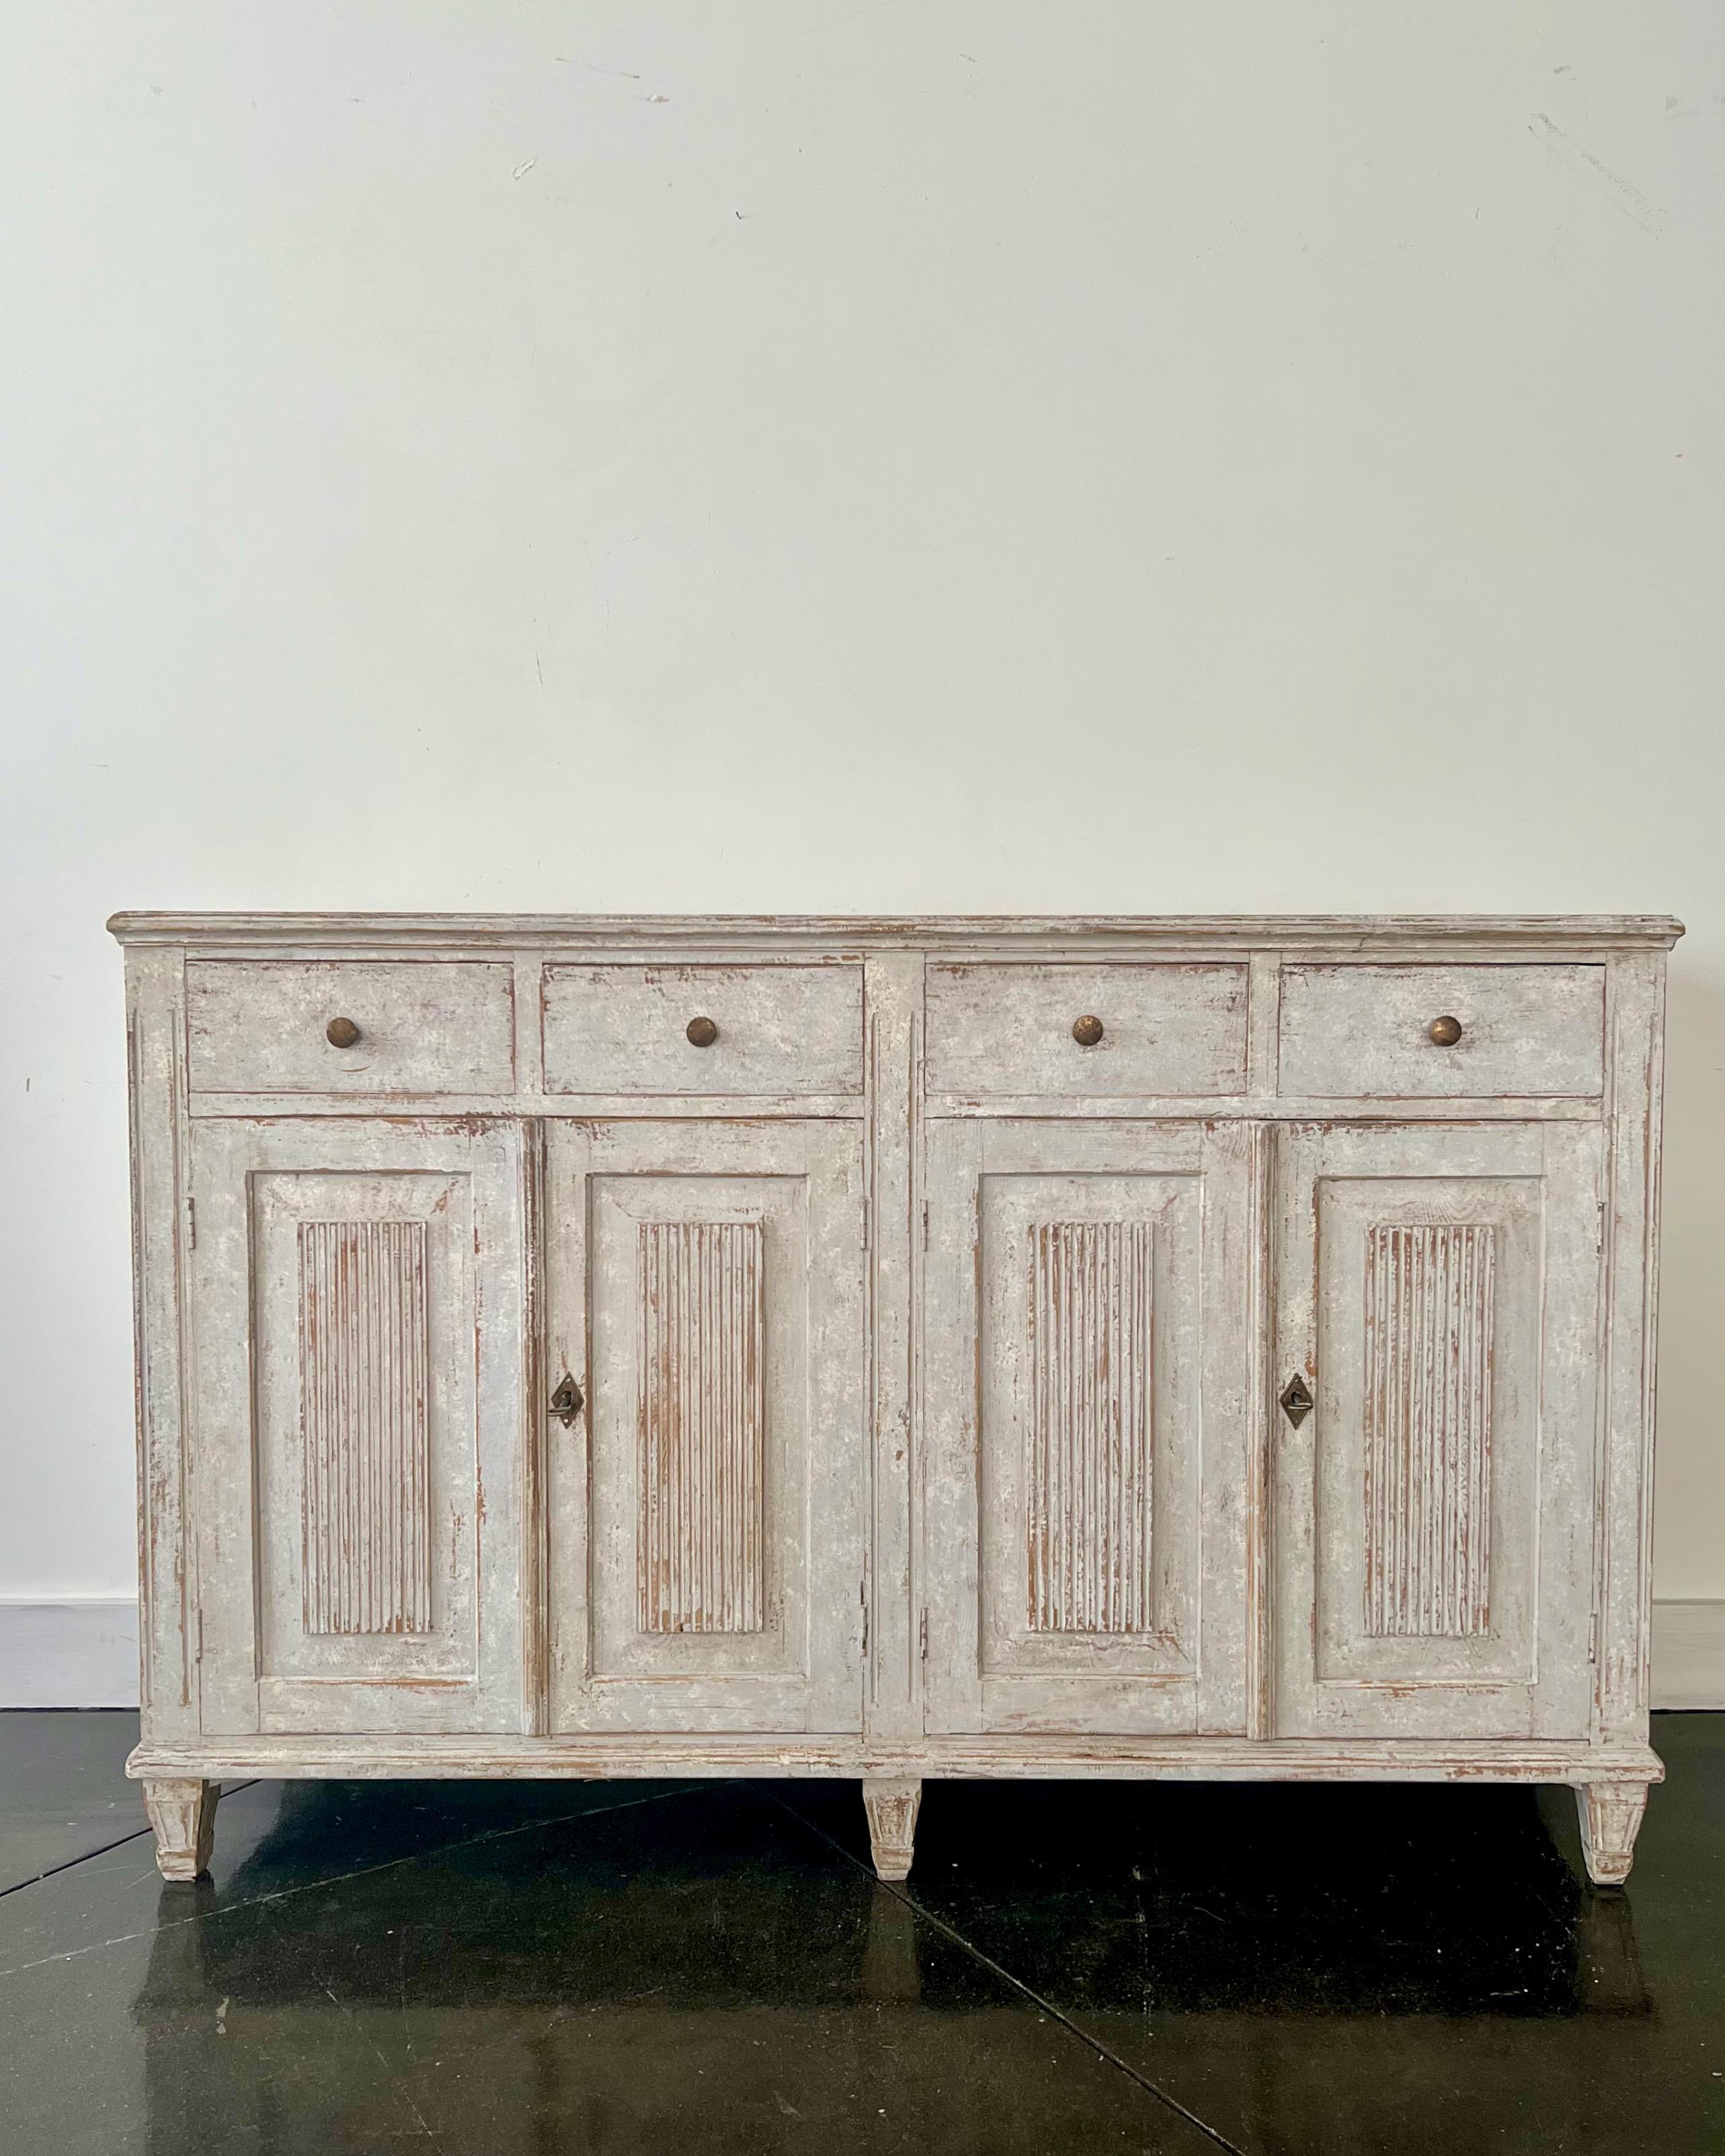 A rare four door Swedish 19th century sideboard in the classic Gustavian Style with carved reeded panel doors and bank of four drawers.
Stockholm, Sweden ca 1850-60